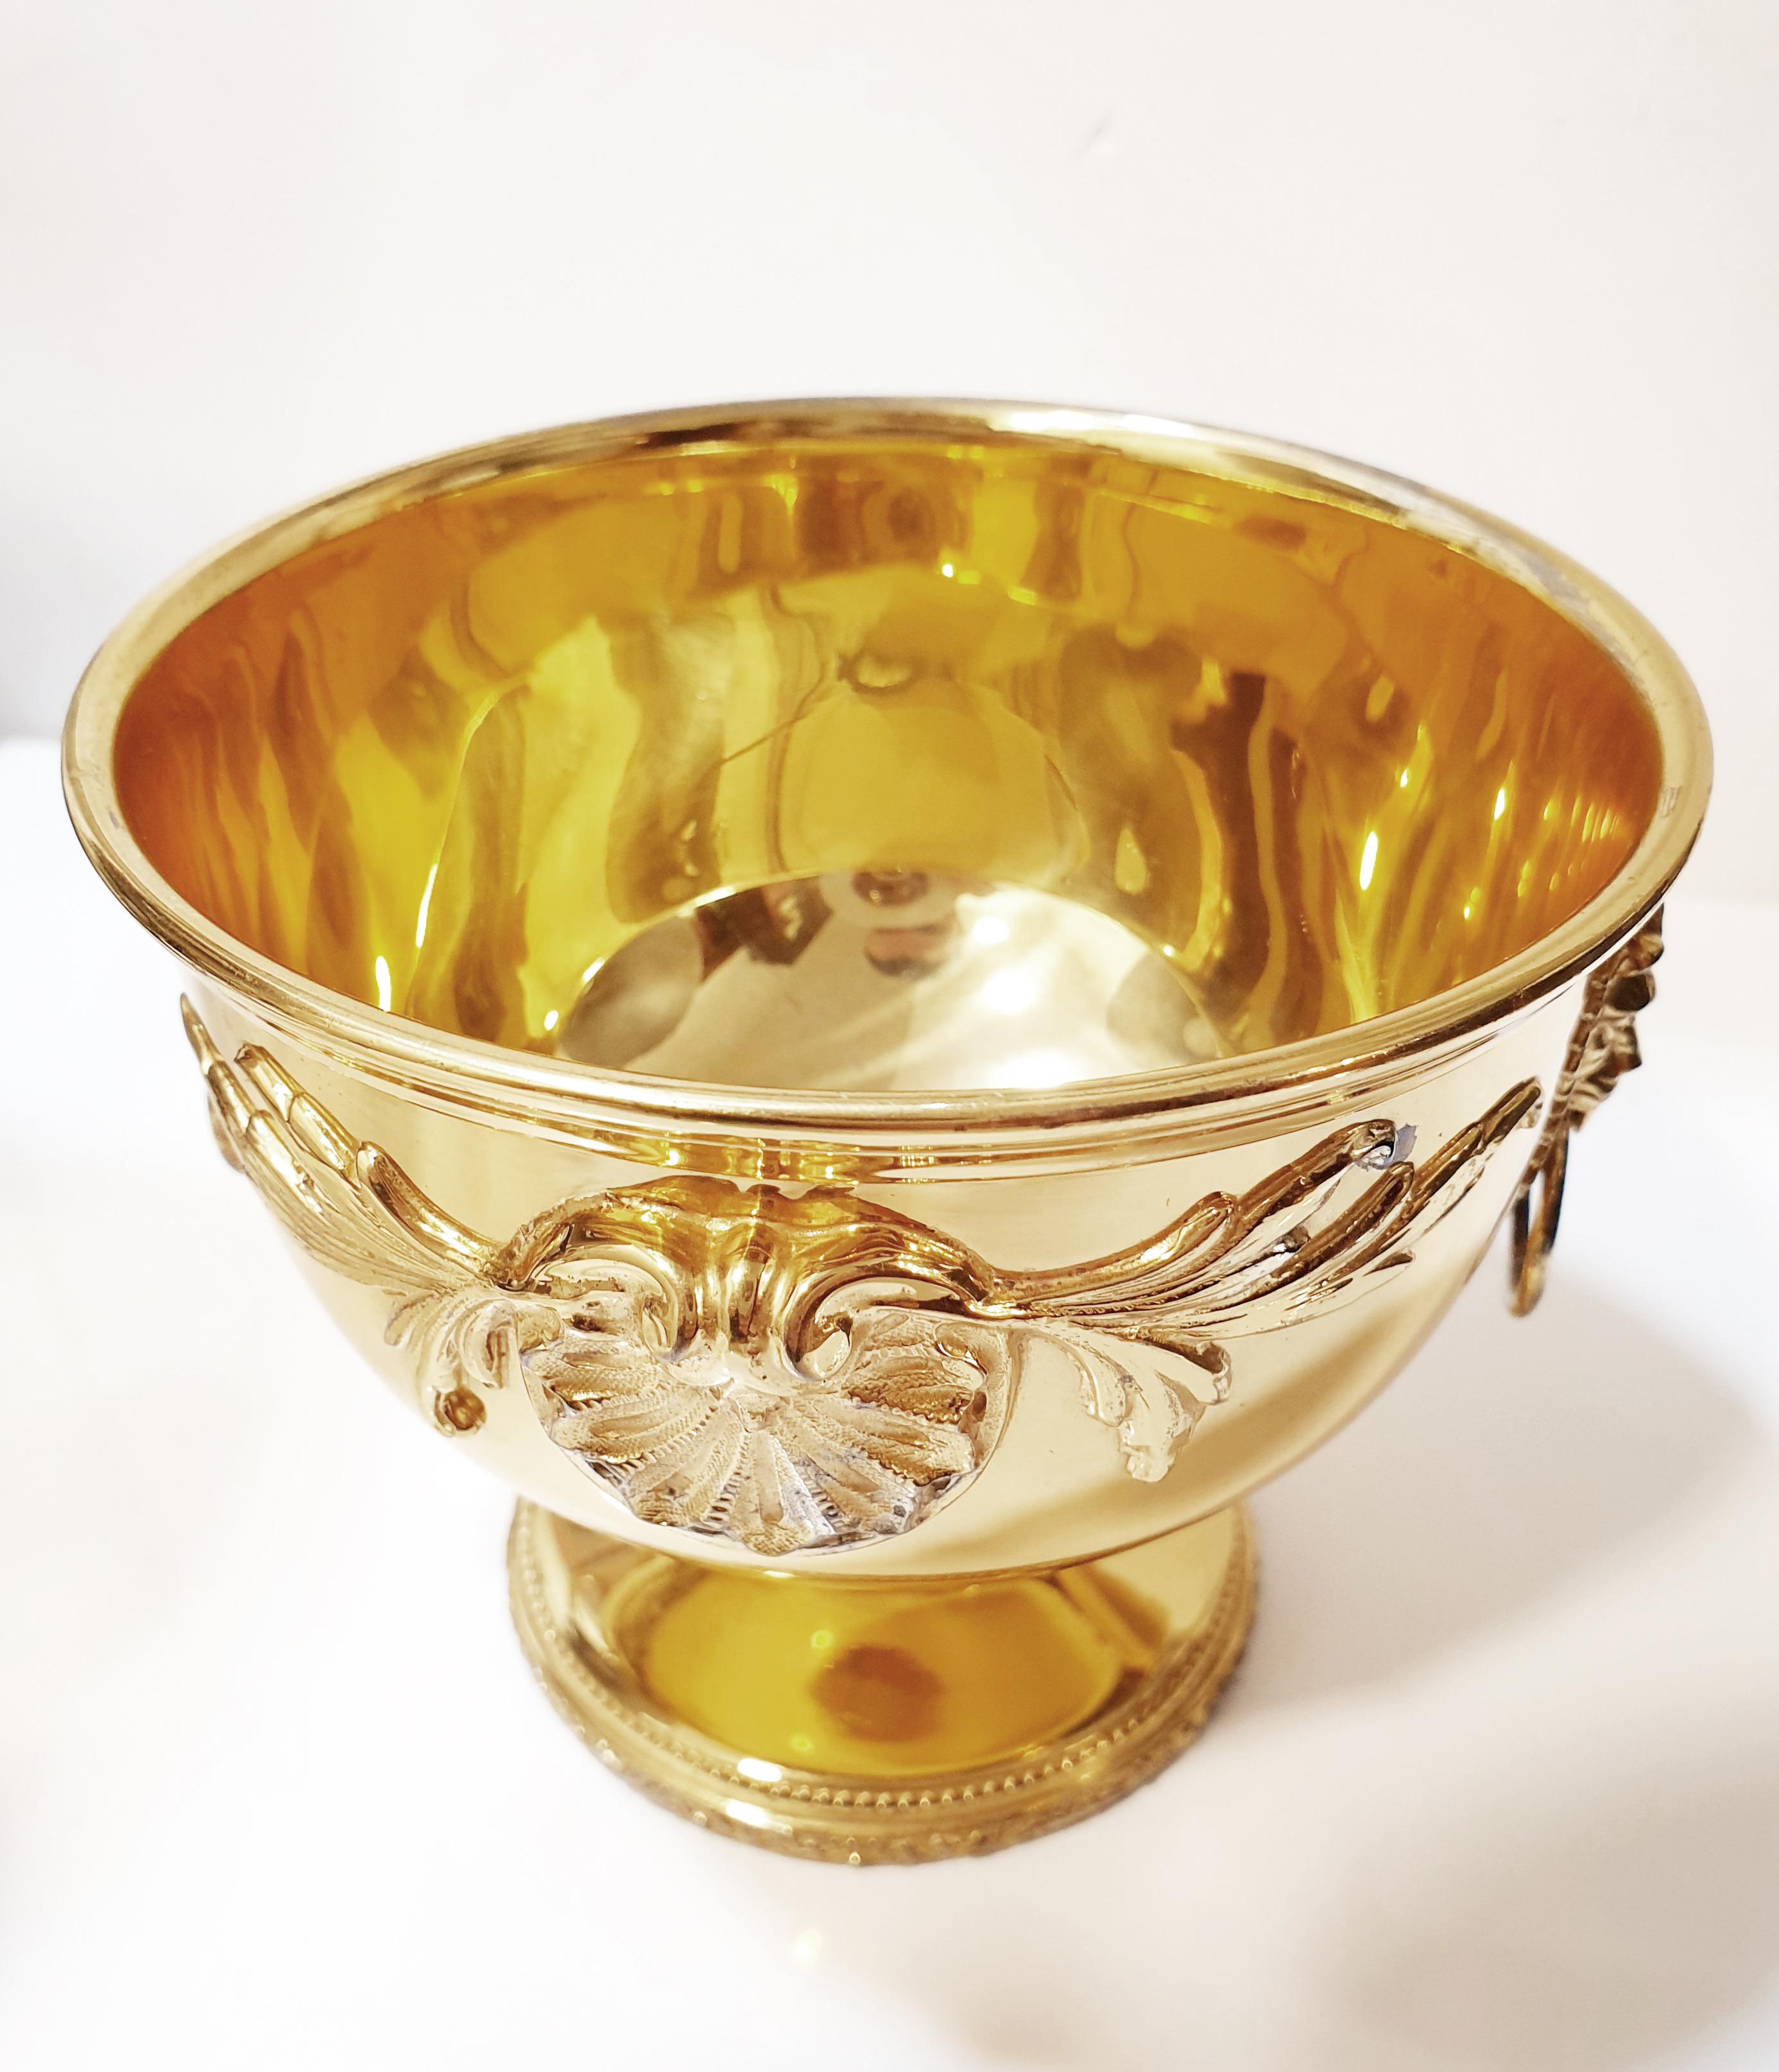 Solid silver 18k gold plated Carrera y Carrera Calyx Cup lion and shell ornament
Rococo ornament handles with lion face and shells 
Signed nº 6312
Diameter 11.8cm 4,64 inches 
Height 10.3cm 4,09 inches 

Carrera and Carrera pieces and their